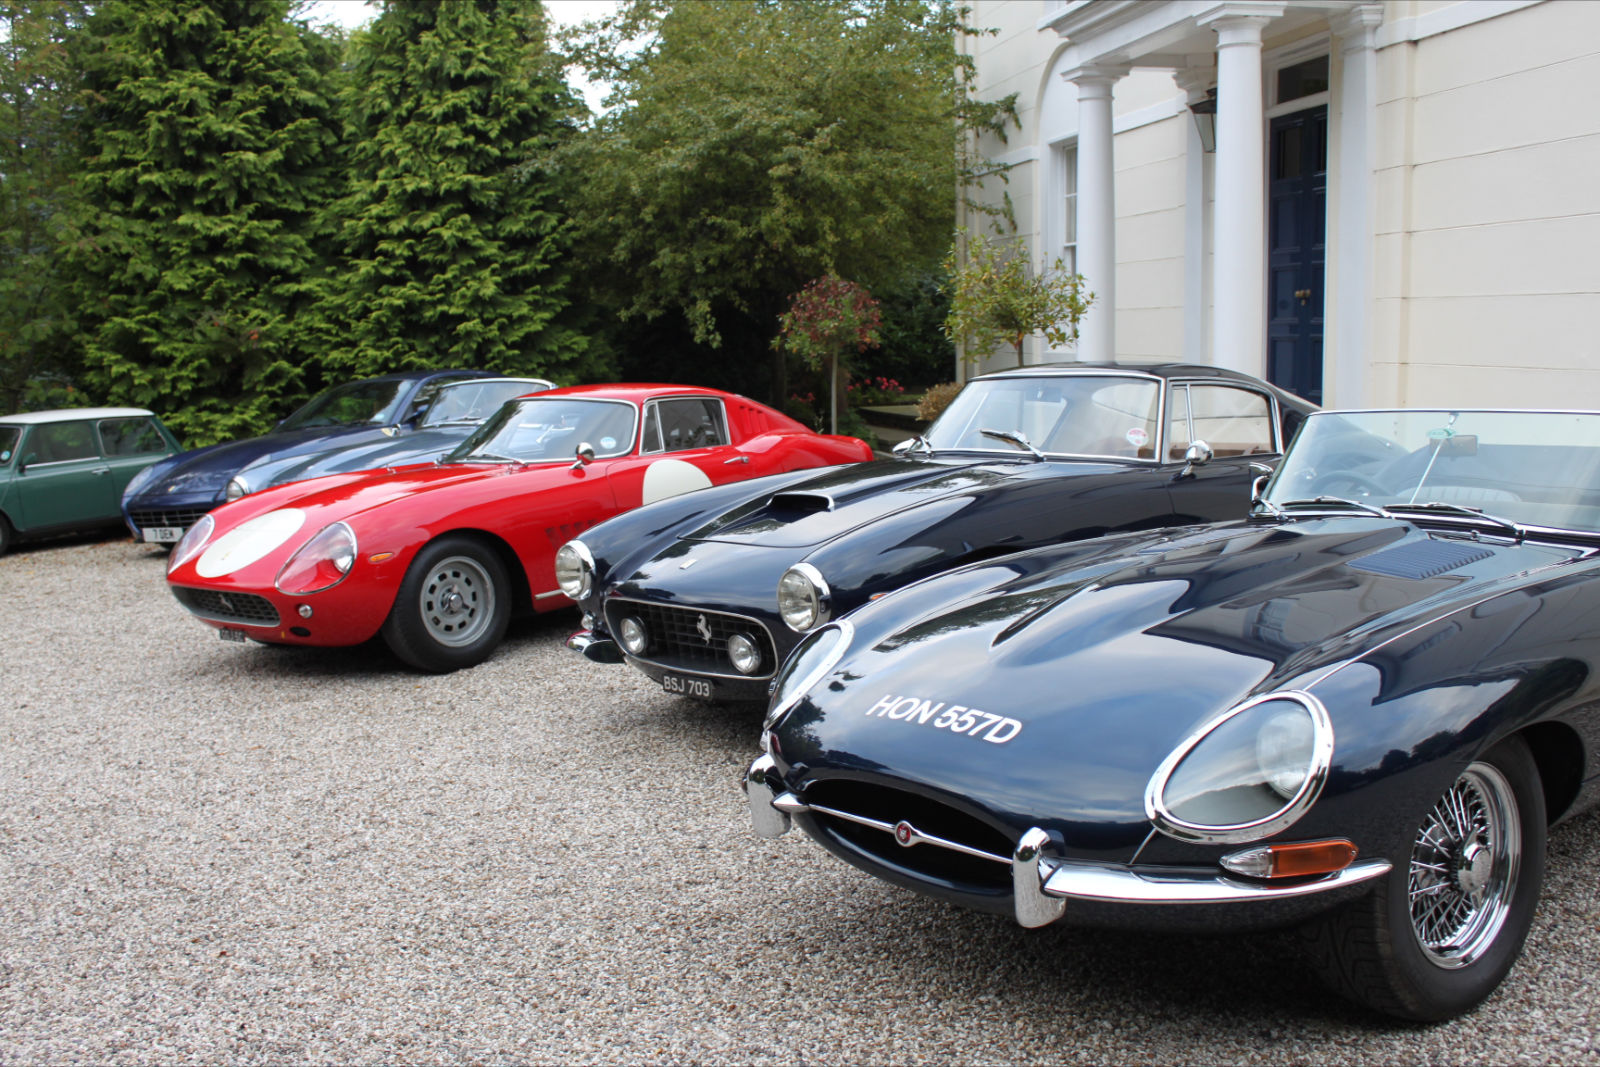 Ferrari 250 SWB or invest elsewhere ? - Page 3 - Supercar General - PistonHeads